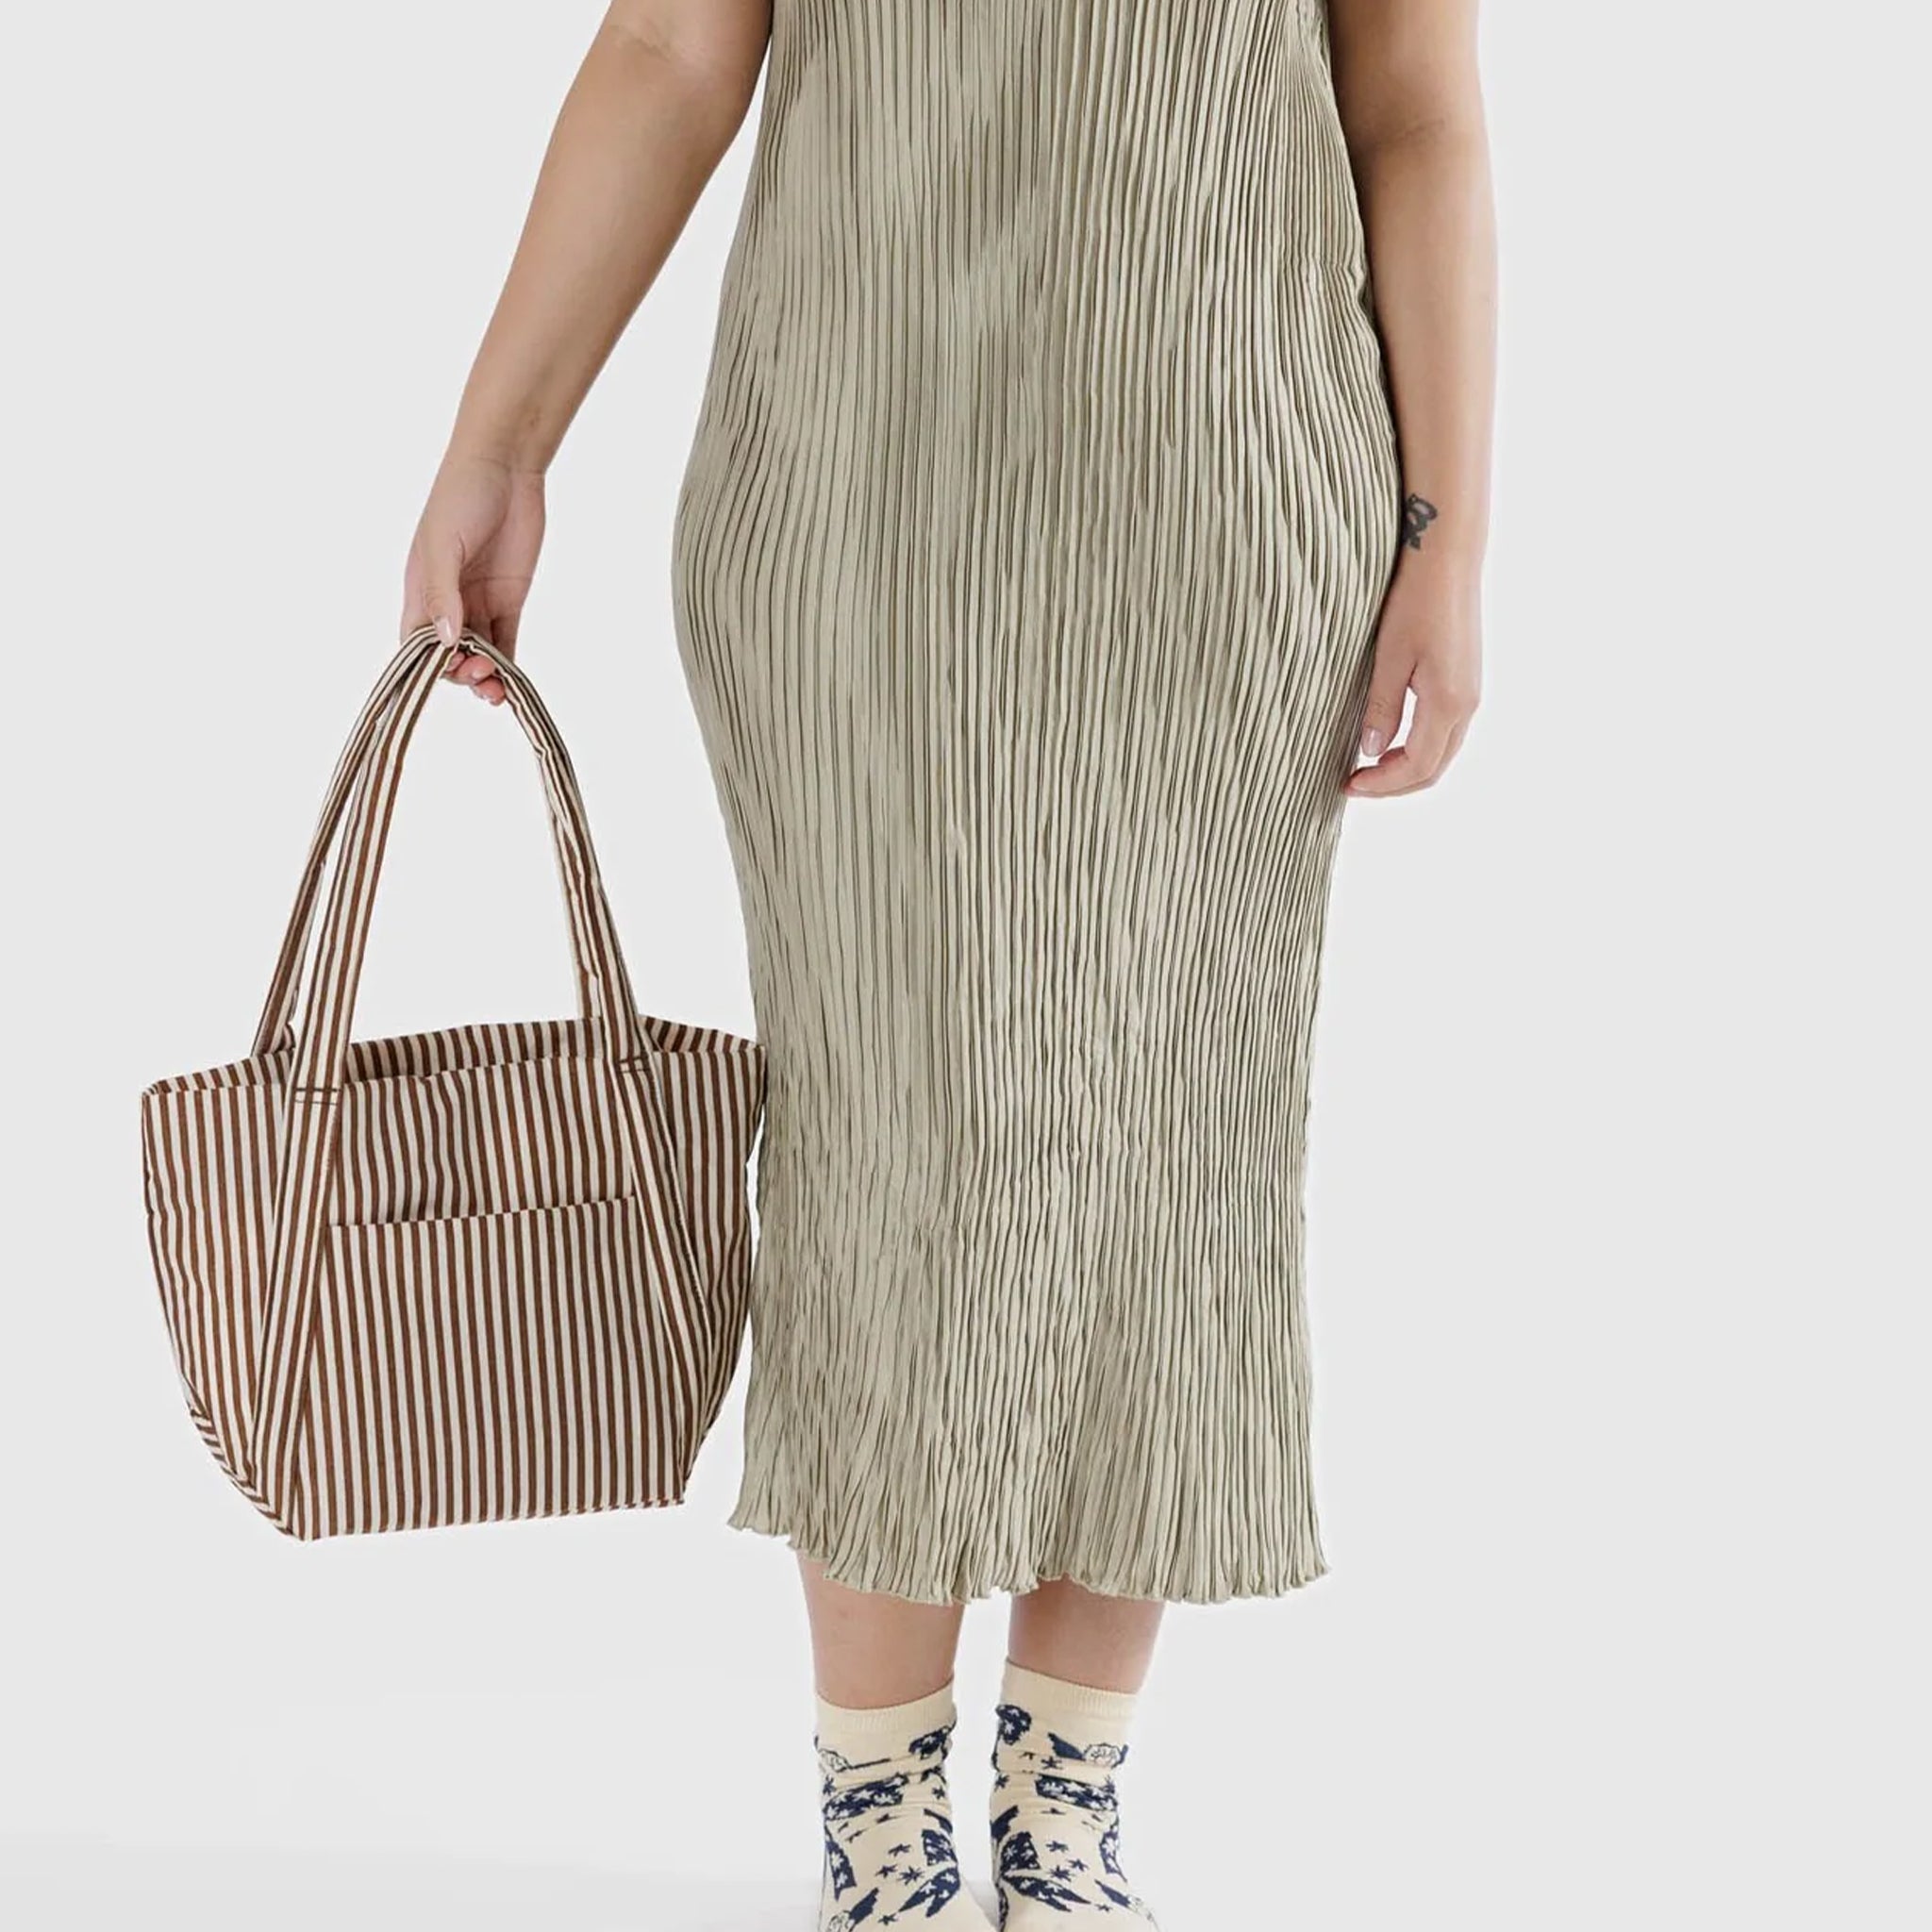 A brown and white stripe nylon tote bag with shoulder handles and a front pocket.